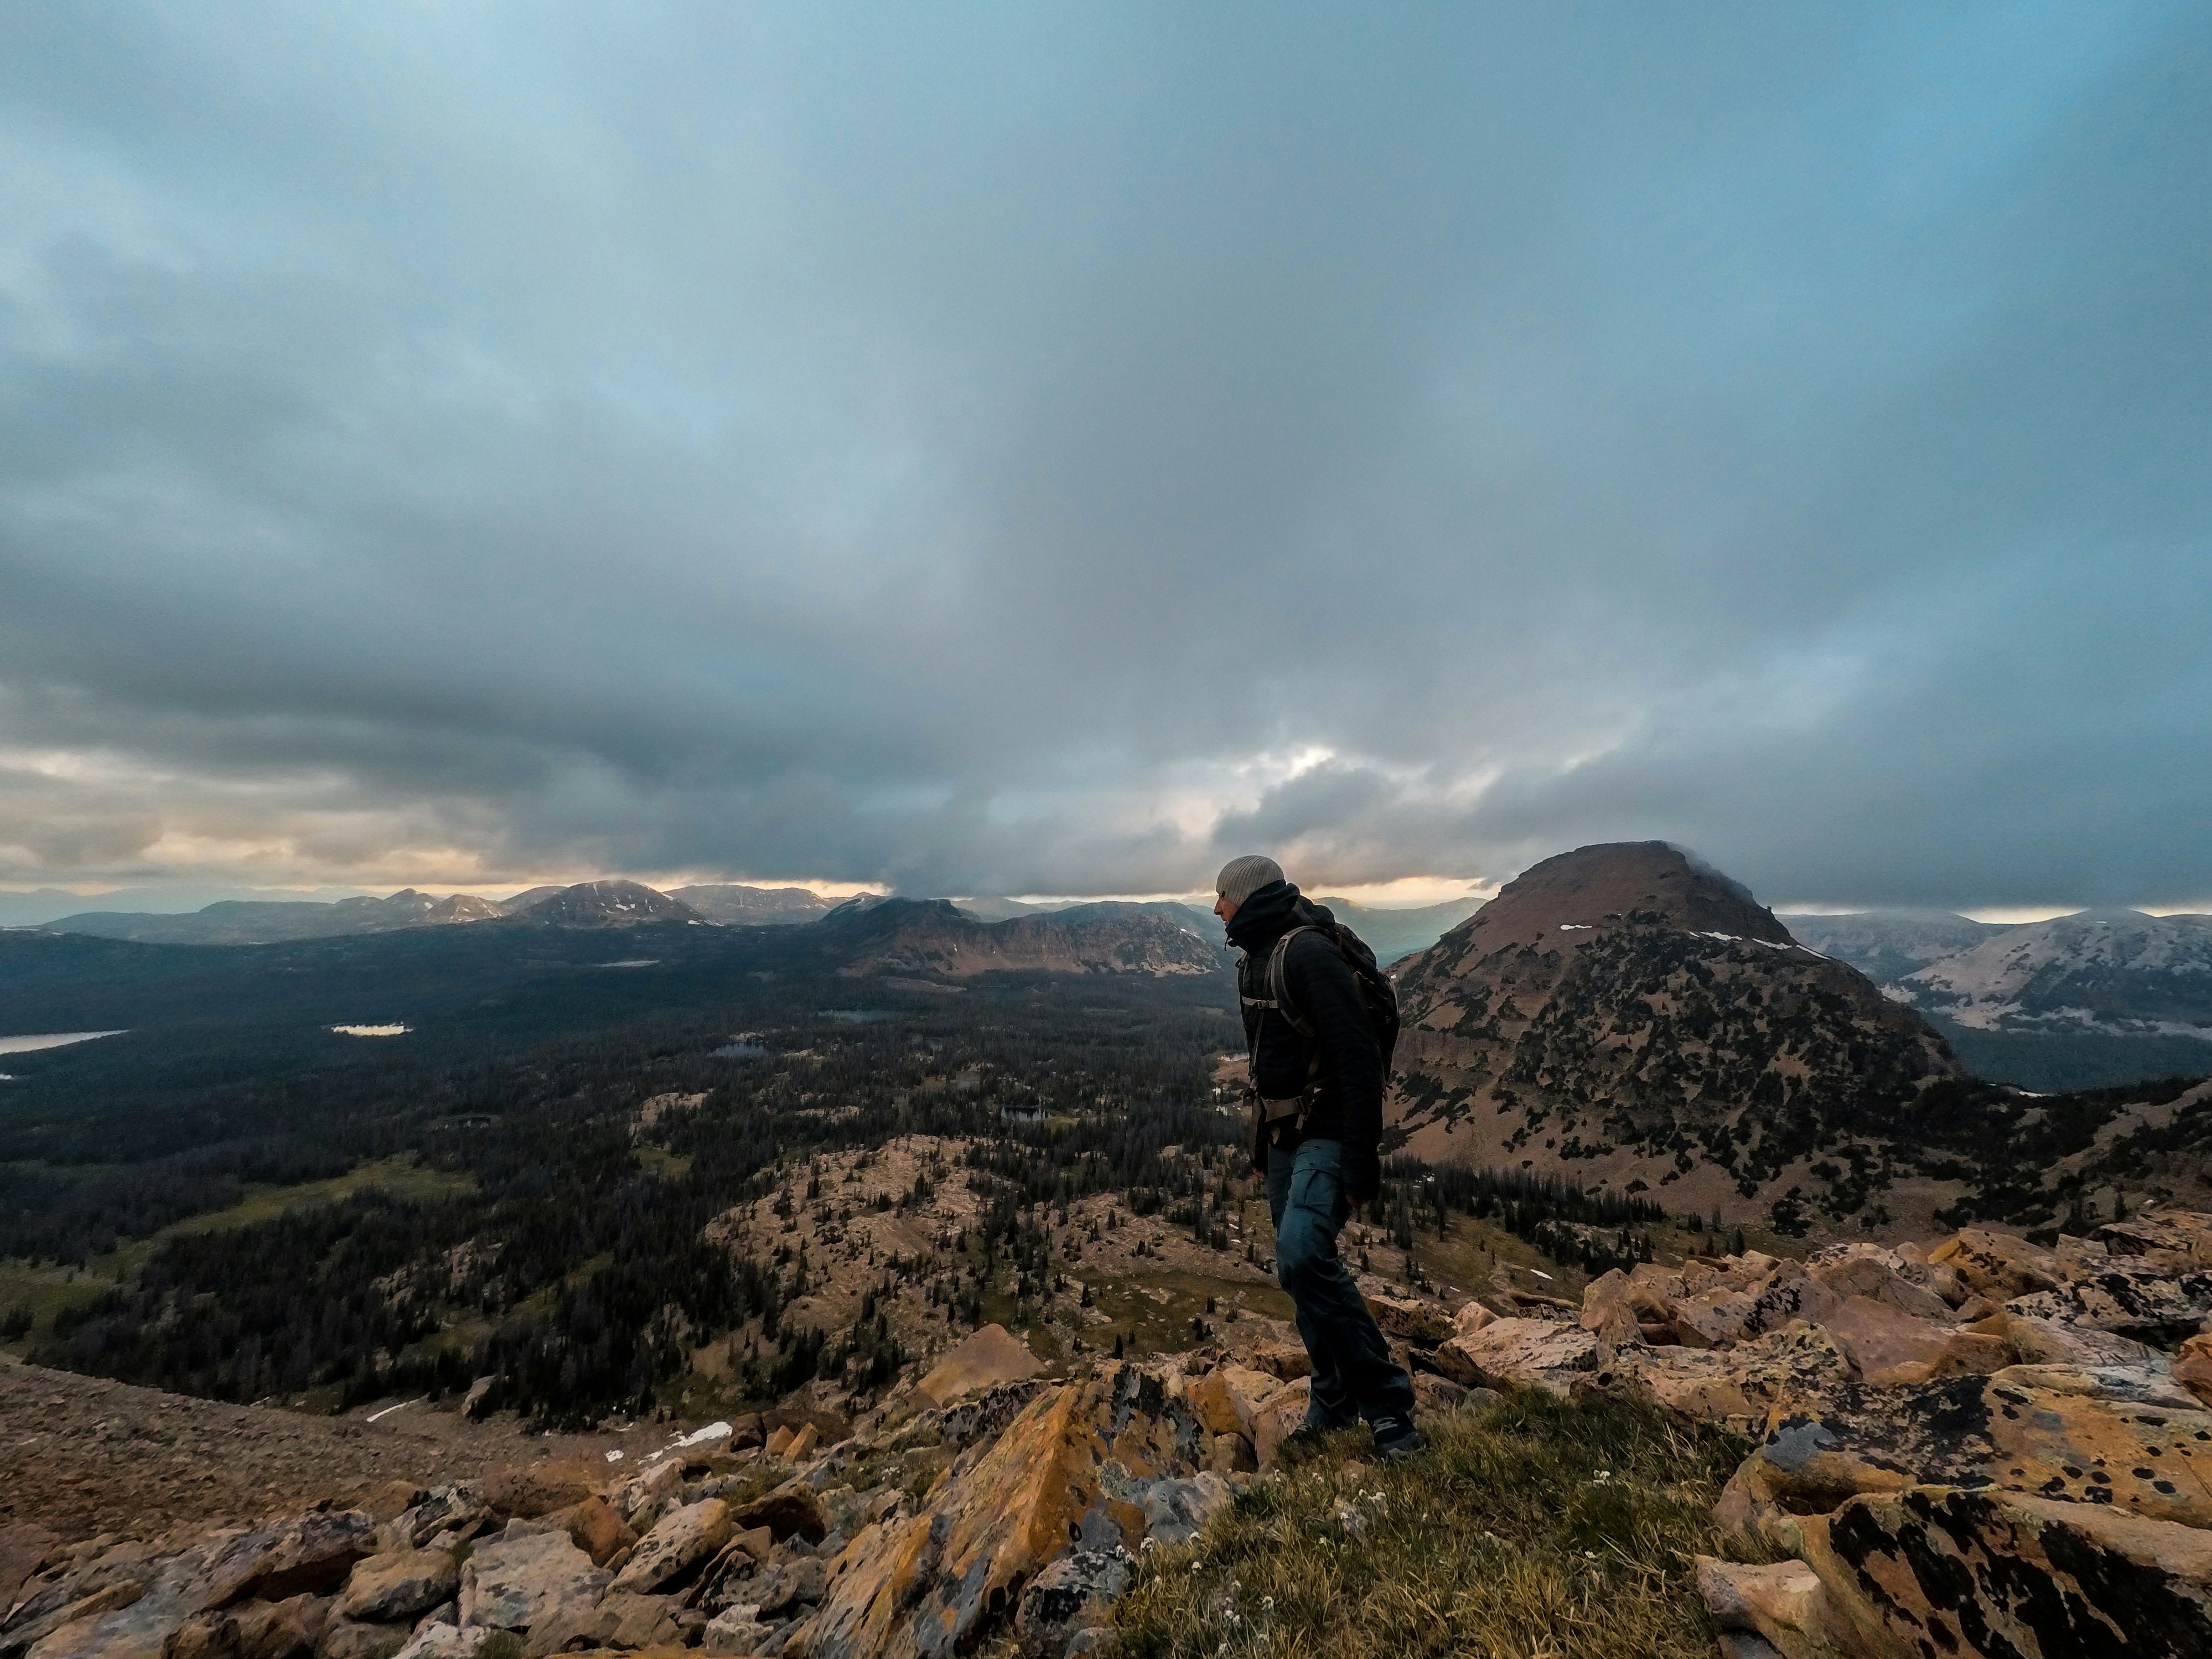 man standing on rocky mountain under gray cloudy sky